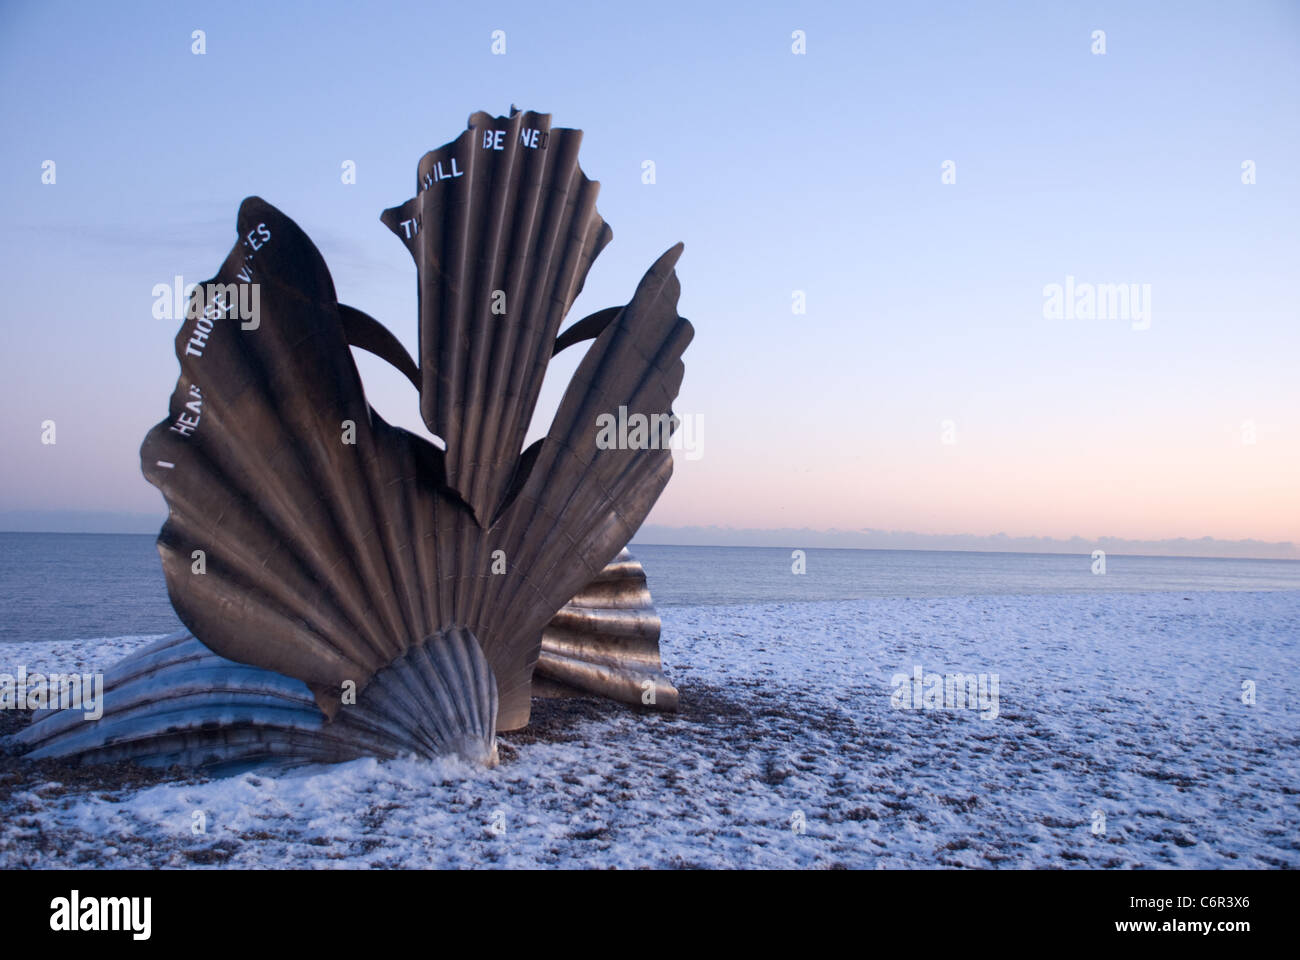 The Scallop sculpture on the beach at Aldeburgh dedicated to Benjamin Britten. Stock Photo